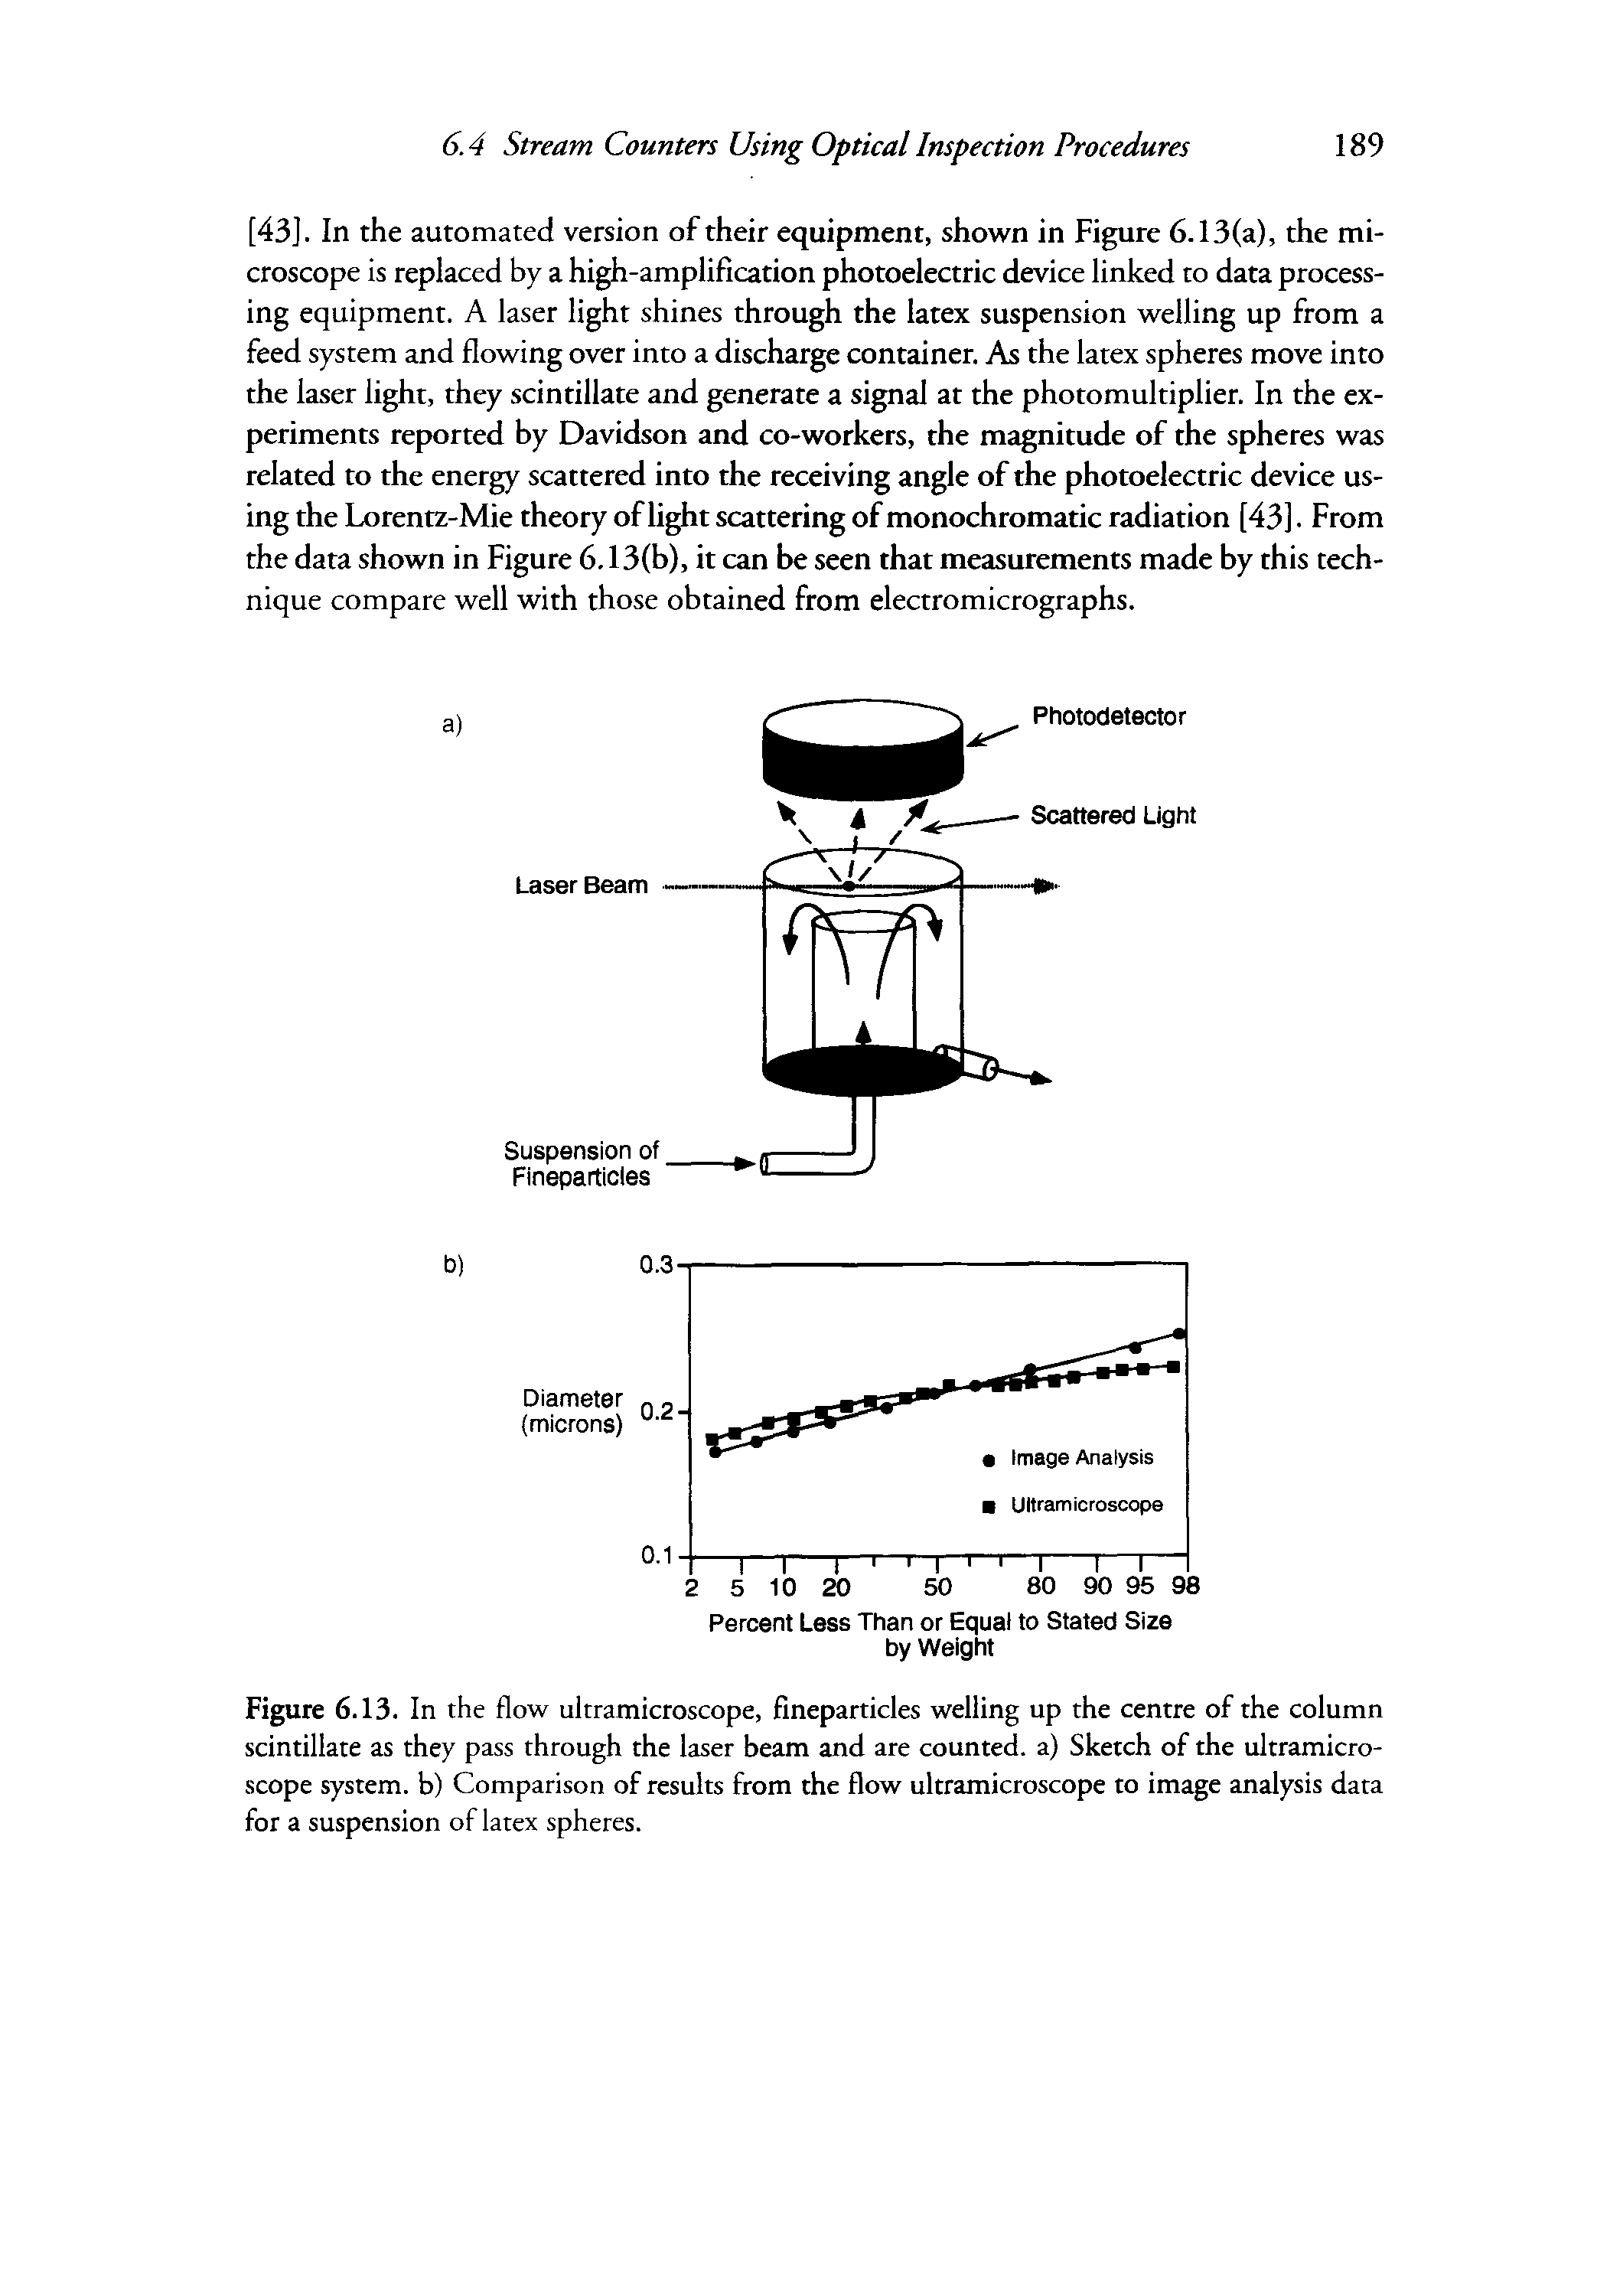 Figure 6.13. In the flow ultramicroscope, fineparticles welling up the centre of the column scintillate as they pass through the laser beam and are counted, a) Sketch of the ultramicroscope system, b) Comparison of results from the flow ultramicroscope to image analysis data for a suspension of latex spheres.